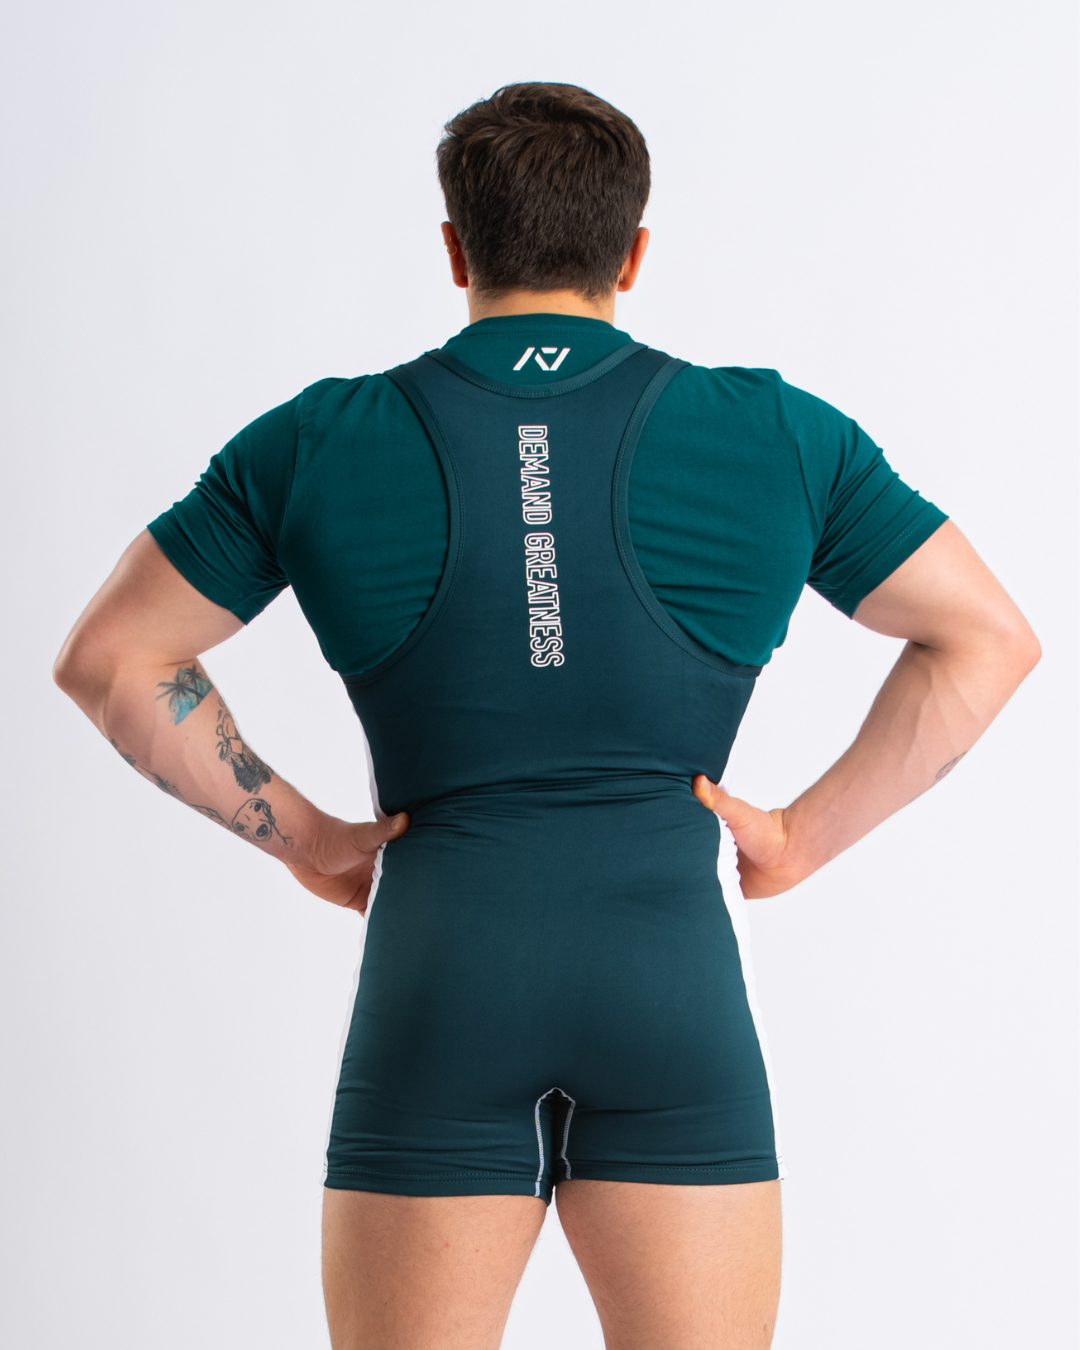 A7 IPF Approved Emerald Forás Luno singlet features extra lat mobility, side panel stitching to guide the squat depth level and curved panel design for a slimming look.  The IPF Approved Kit includes Luno Powerlifting Singlet, A7 Meet Shirt, A7 Zebra Wrist Wraps, A7 Deadlift Socks, Hourglass Knee Sleeves (Stiff Knee Sleeves and Rigor Mortis Knee Sleeves). Genouill�res powerlifting shipping to France, Spain, Ireland, Germany, Italy, Sweden and EU.